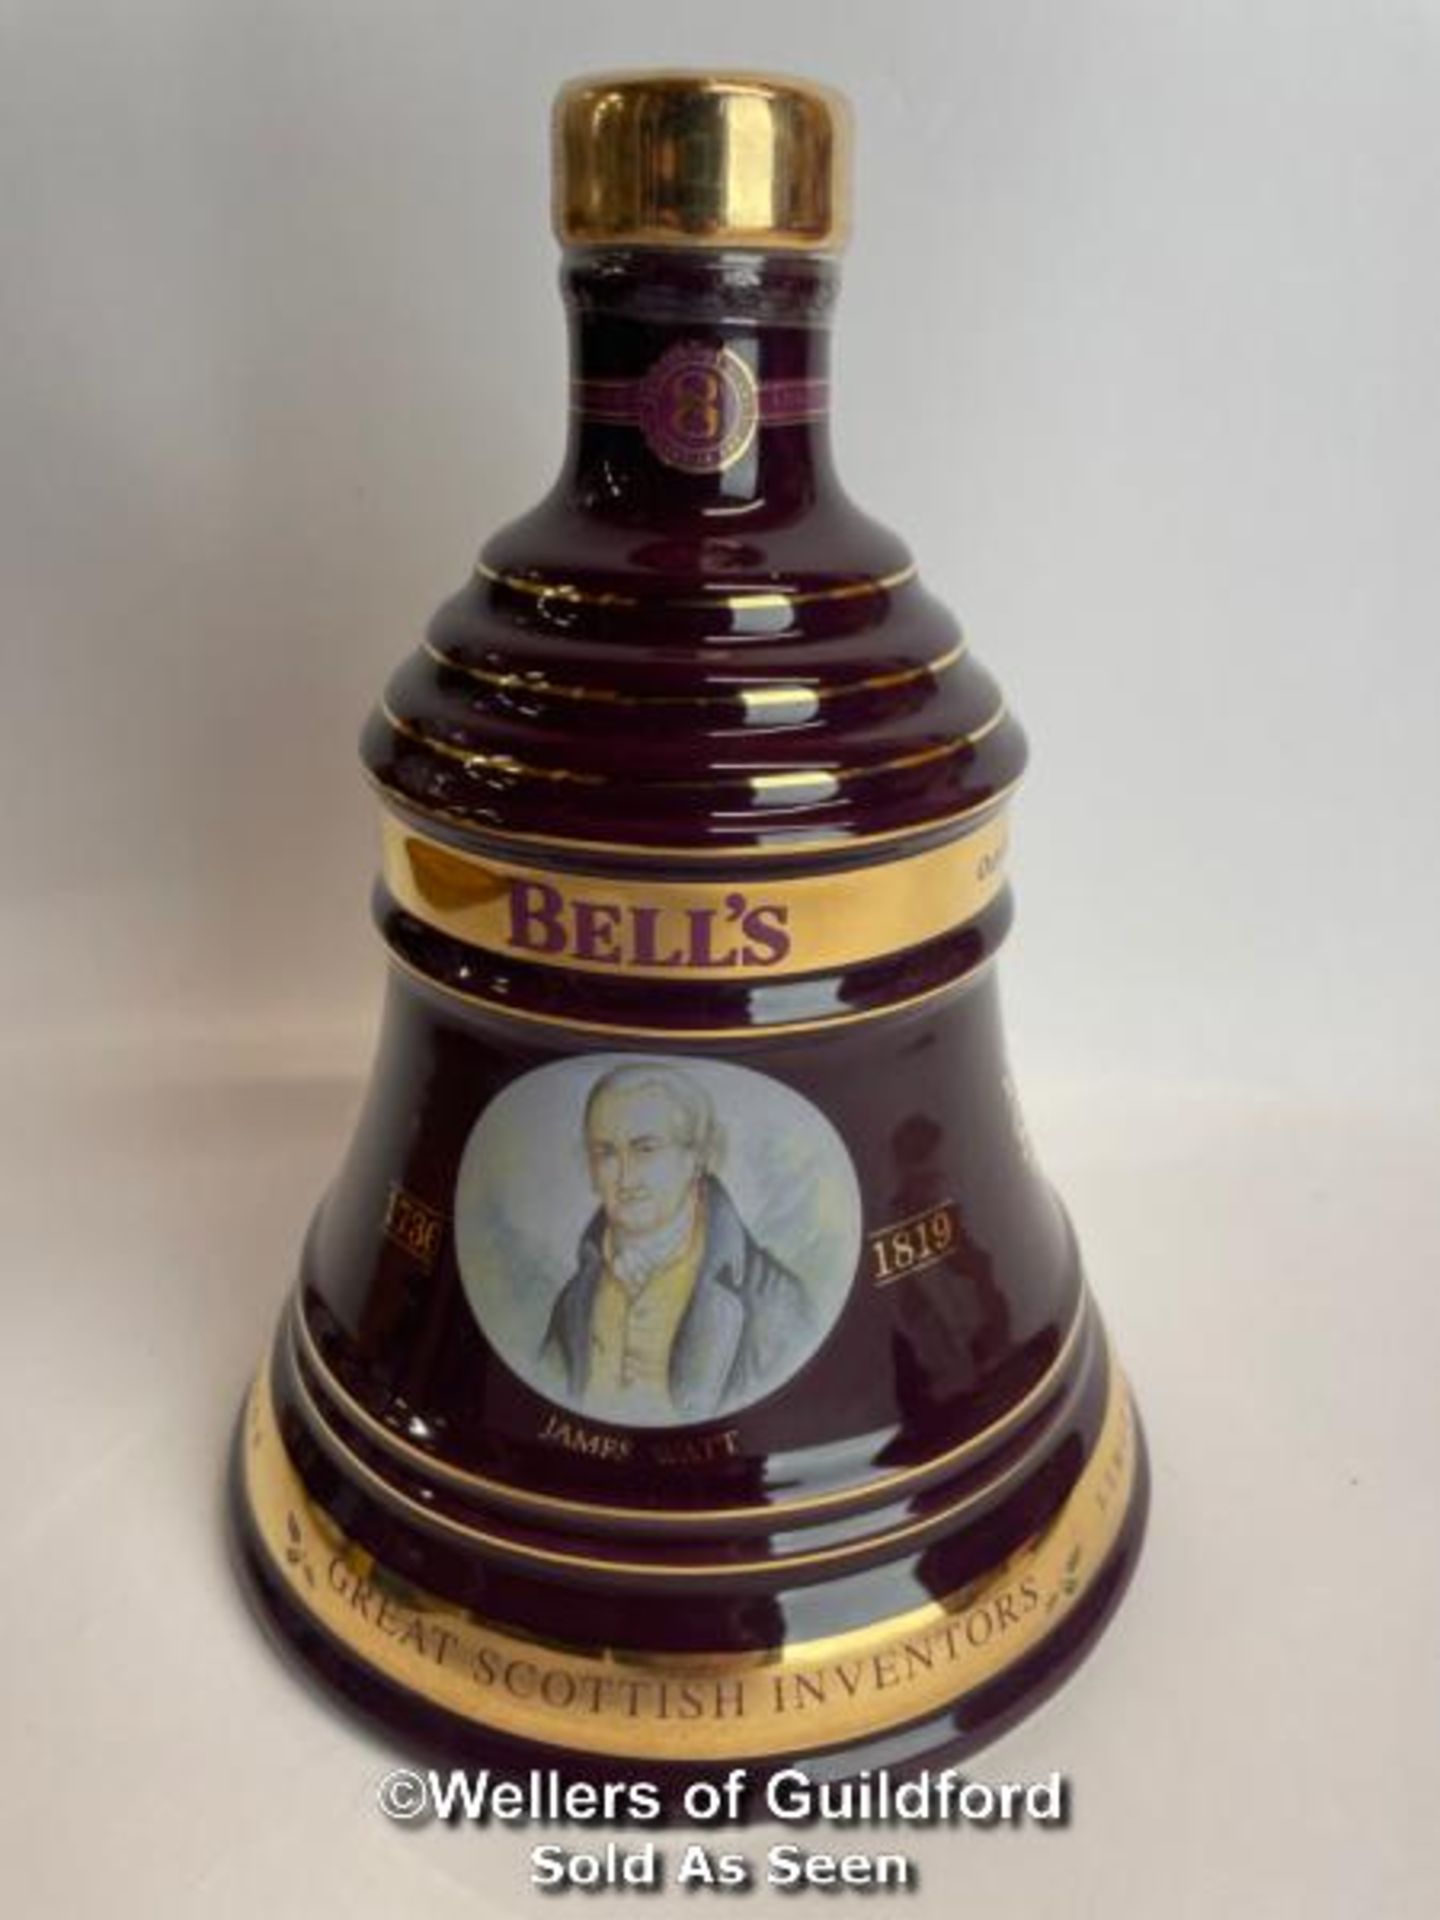 Bell's 2002 Old Scotch Whisky Limited Edition Christmas Decanter, Aged 8 Years, Brand New and Boxed, - Image 4 of 8